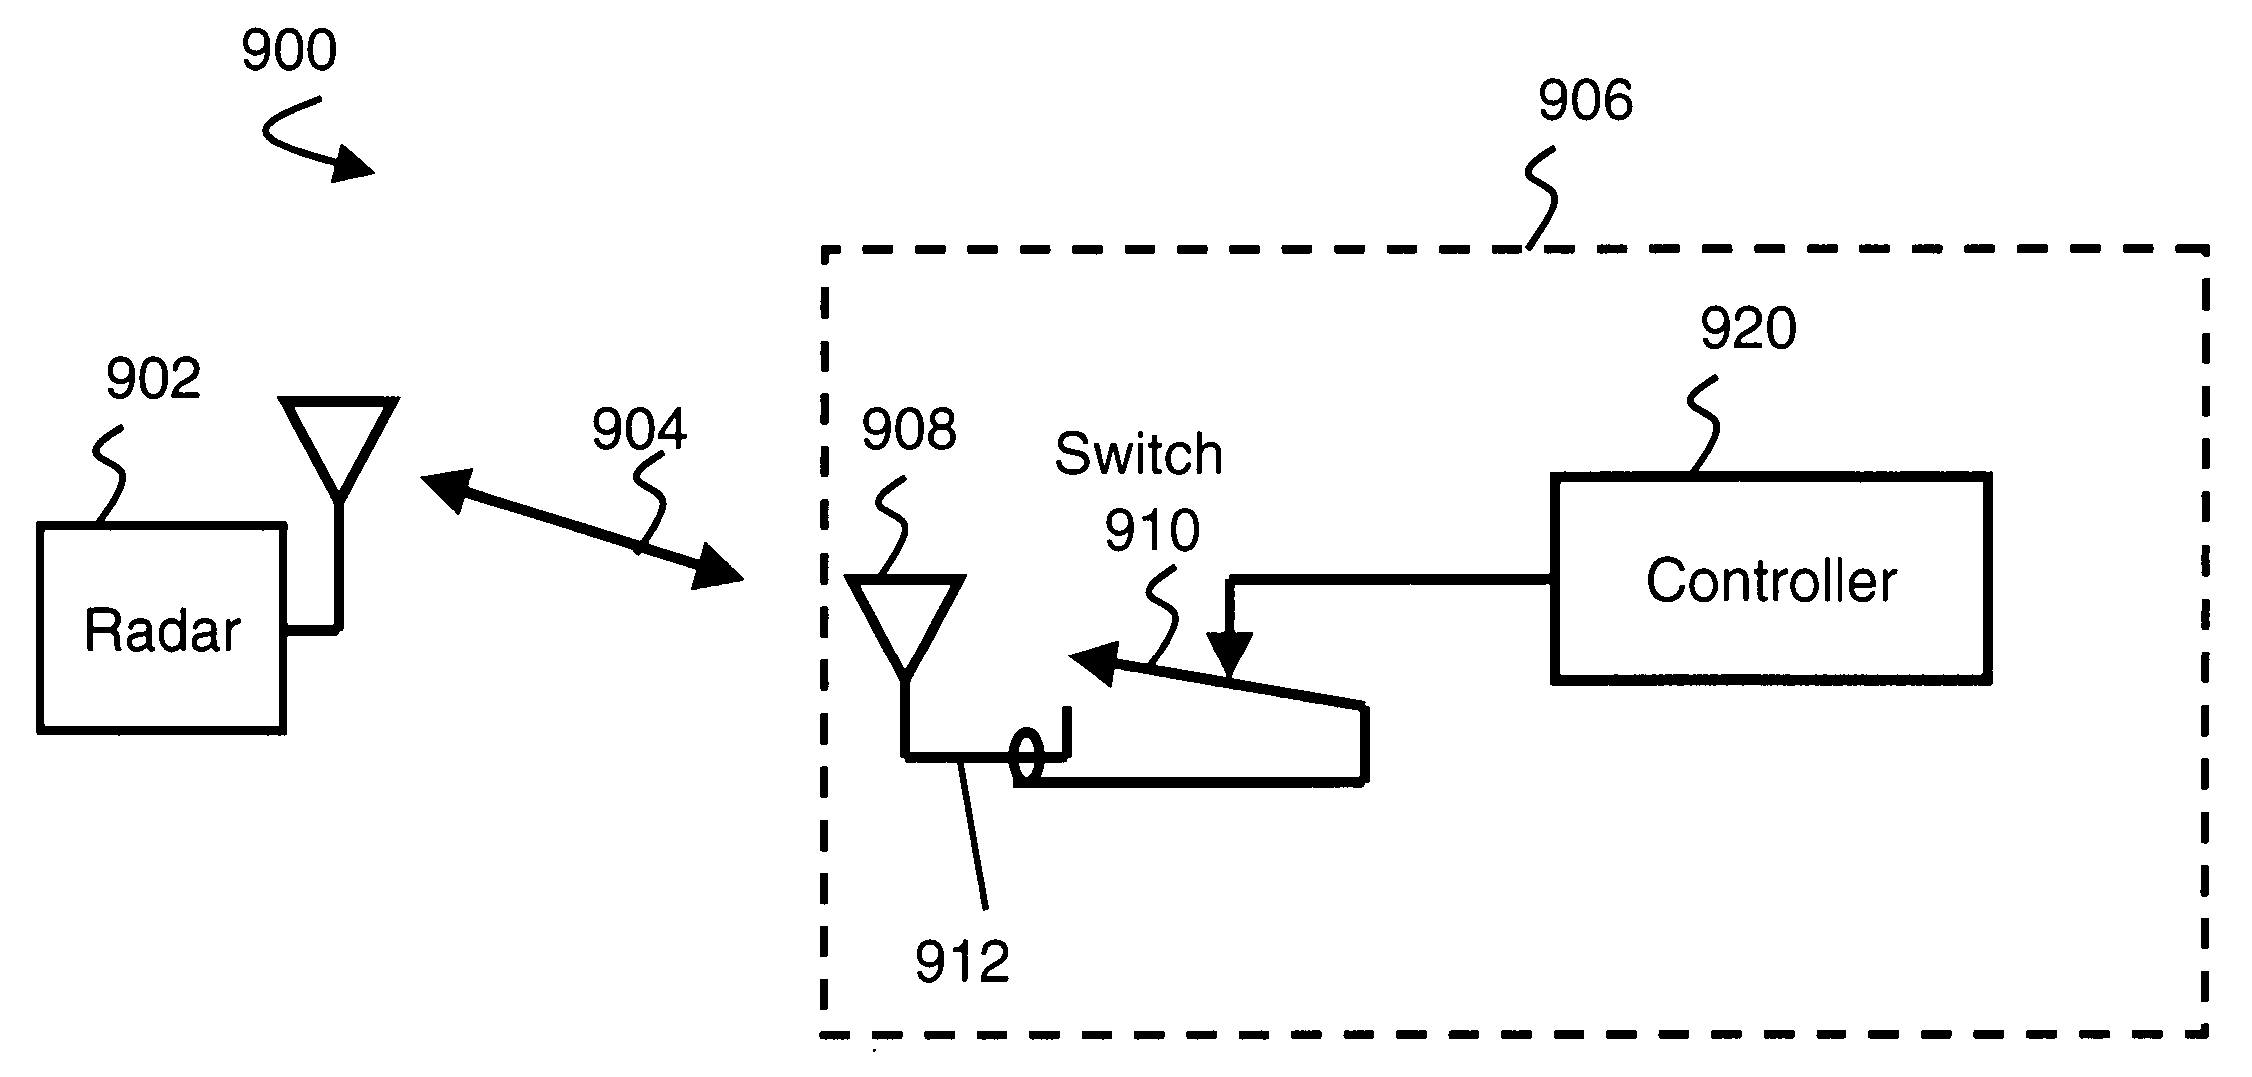 System and method for detecting objects and communicating information